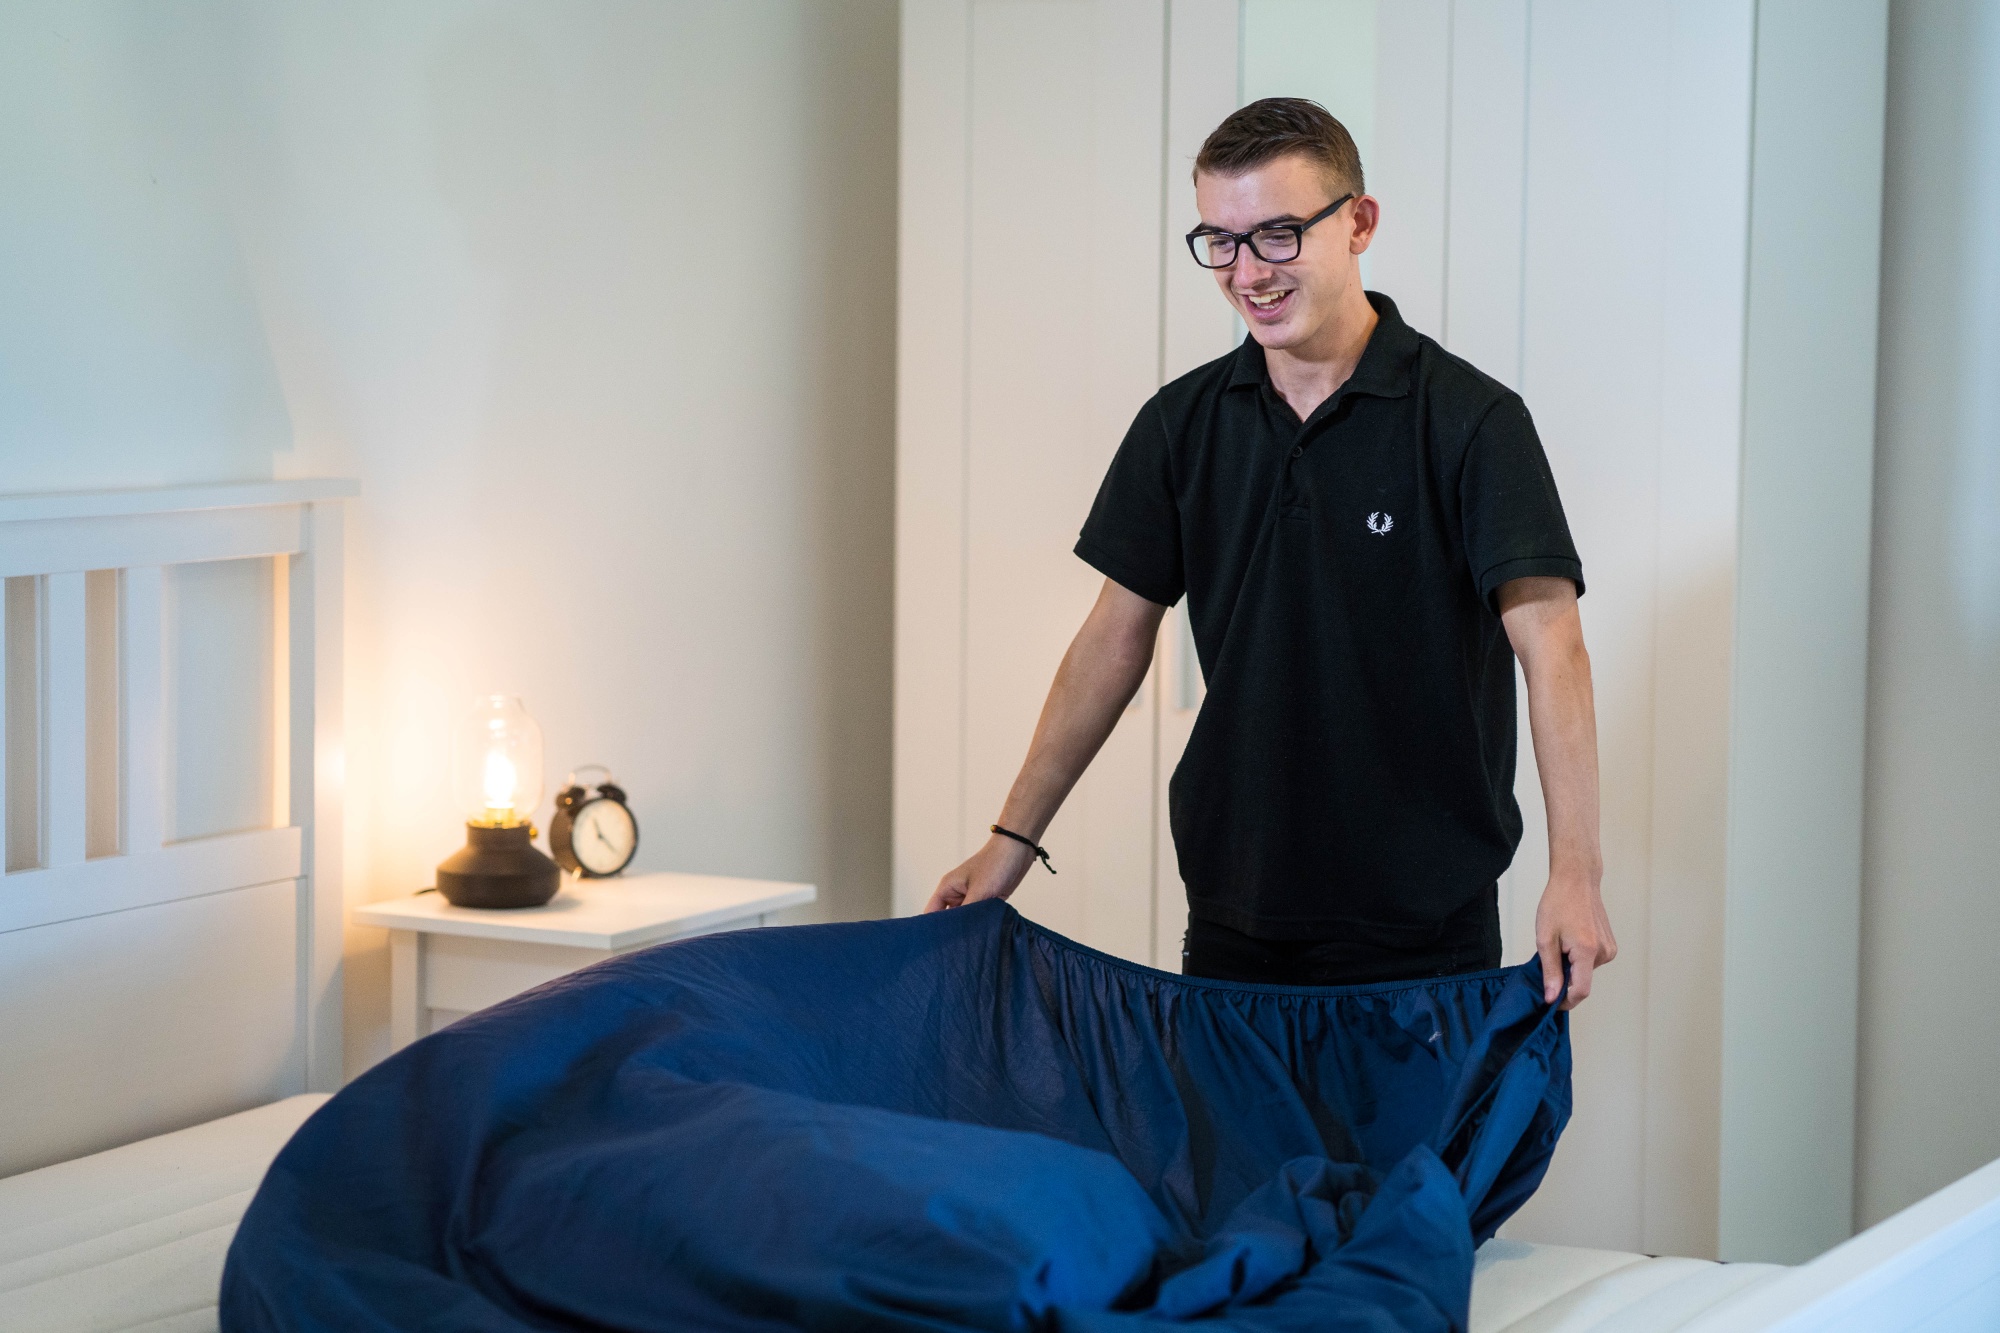 Student demonstrating independent living skills by making a bed